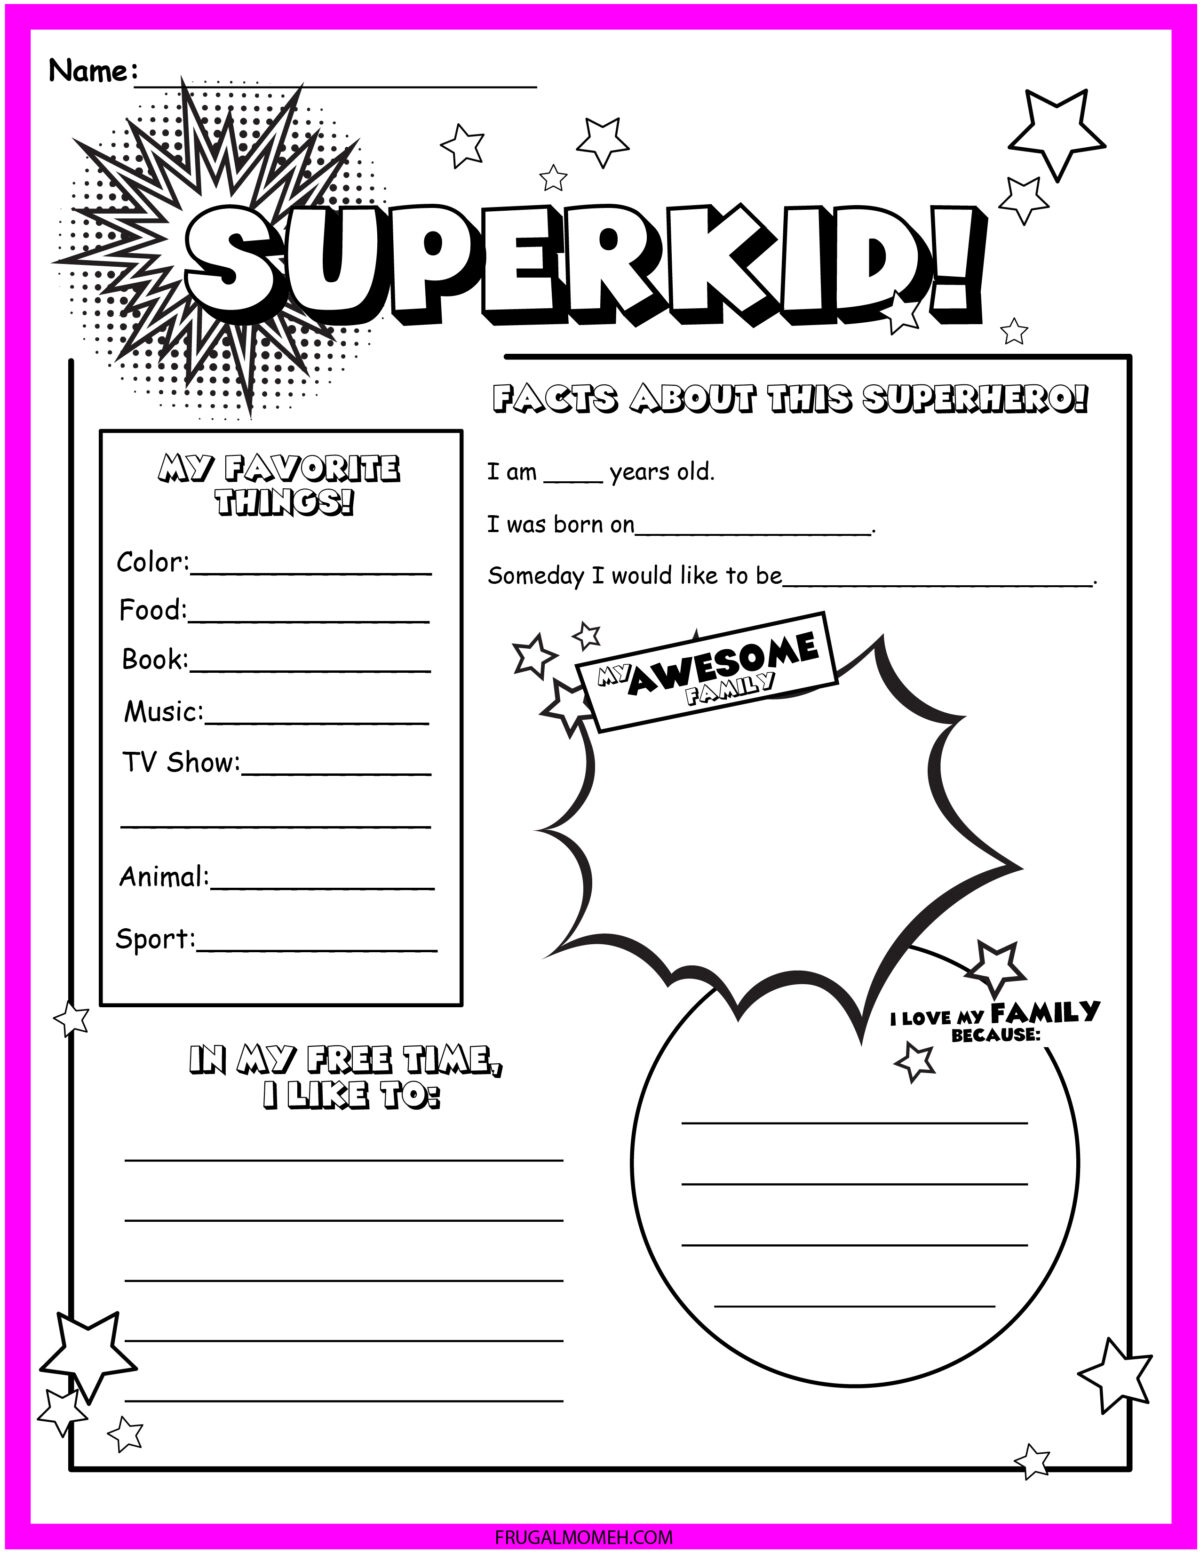 This worksheet gives kids the chance to record some of their favourite things, with a superhero theme!